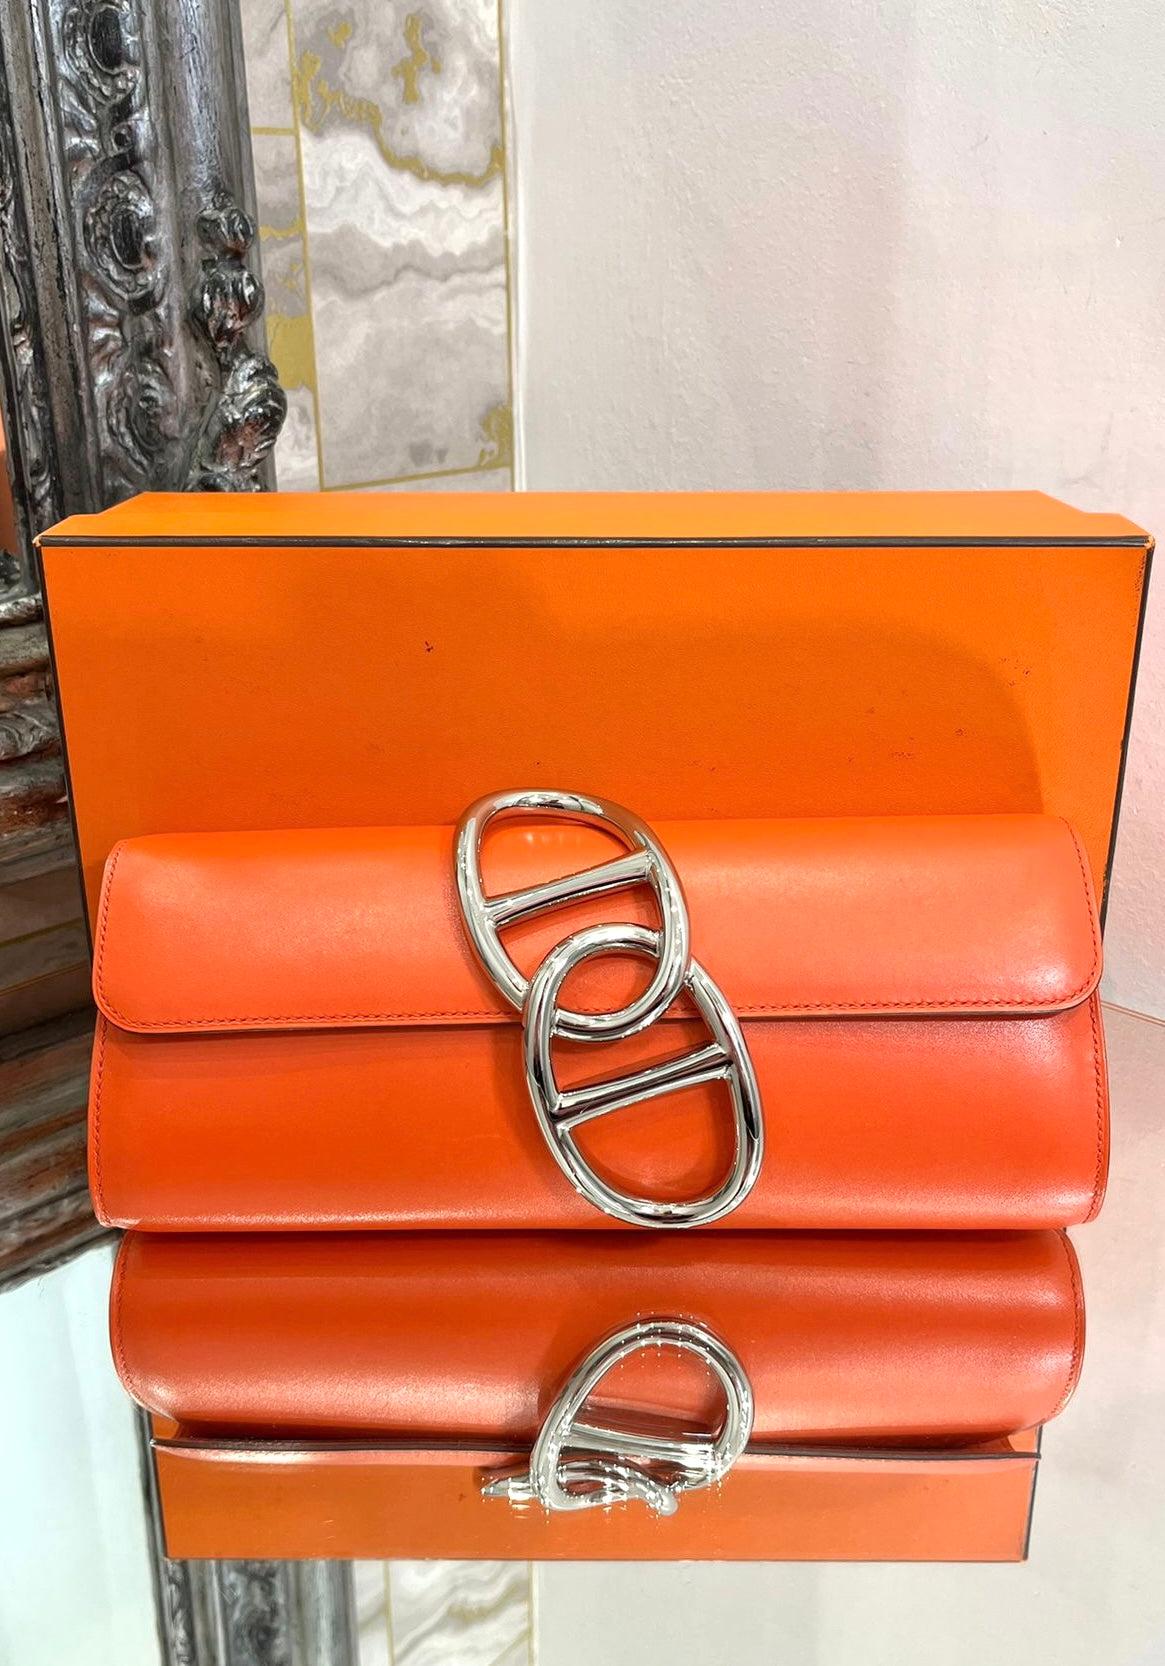 Hermes Egee Leather Clutch Bag

Hermes famous Orange, cylinder style bag with palladium iconic

signature Chaine D’Ancre feature to the front. Date code 2016.

Size - Height 10cm, Width 25cm, Depth 4cm

Condition - Very Good (Mark to leather where